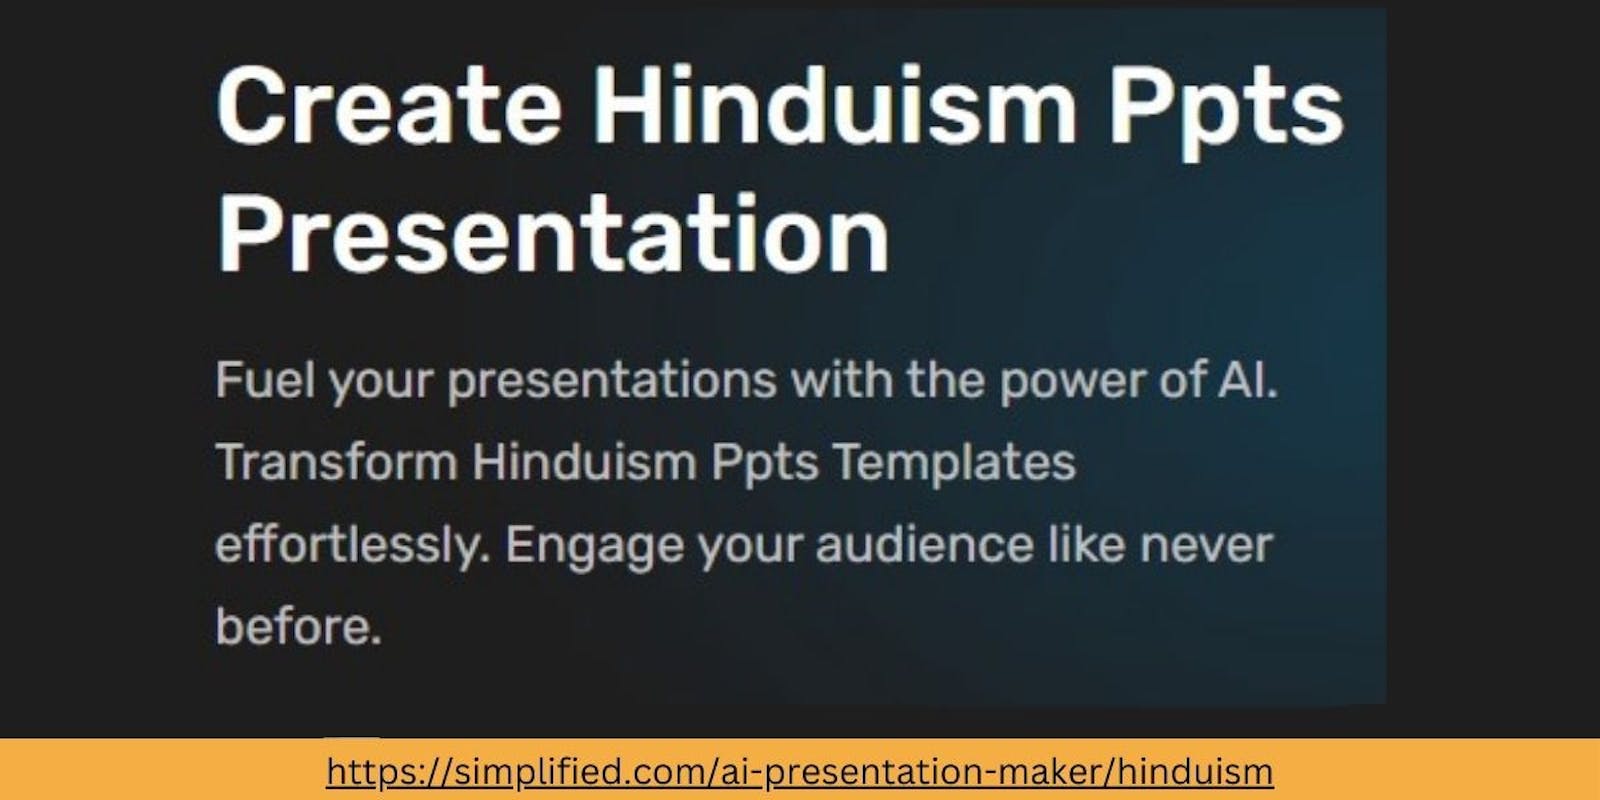 Create Dynamic Hinduism PPT Presentations Online: Simplified Presentation Tool